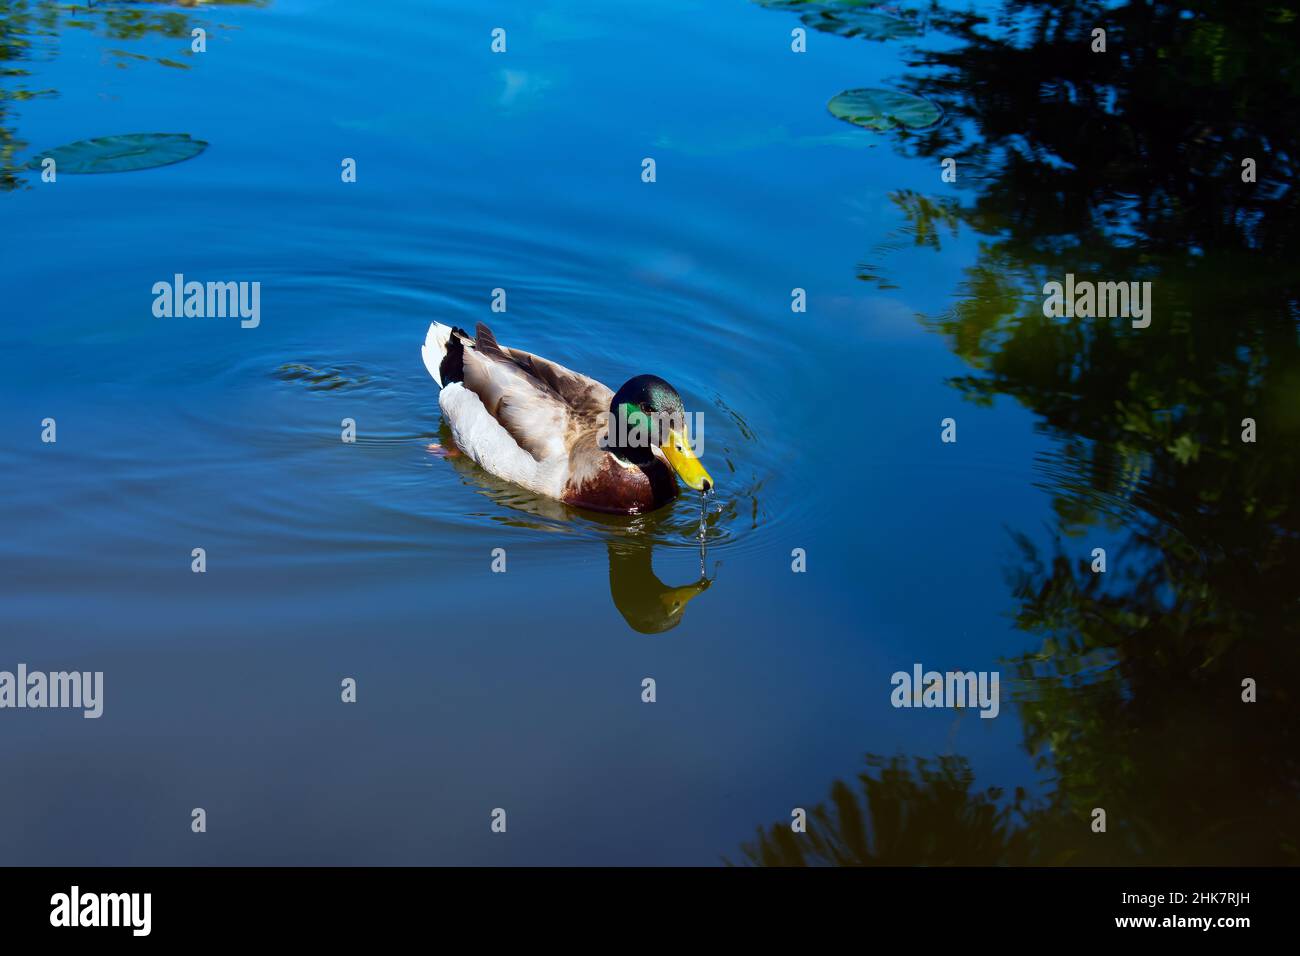 A Mallard Duck ( Anas platyrhynchos ) at Flatford, Operated by the National Trust in Suffolk, England. Reflections of tree in the blue water. Stock Photo